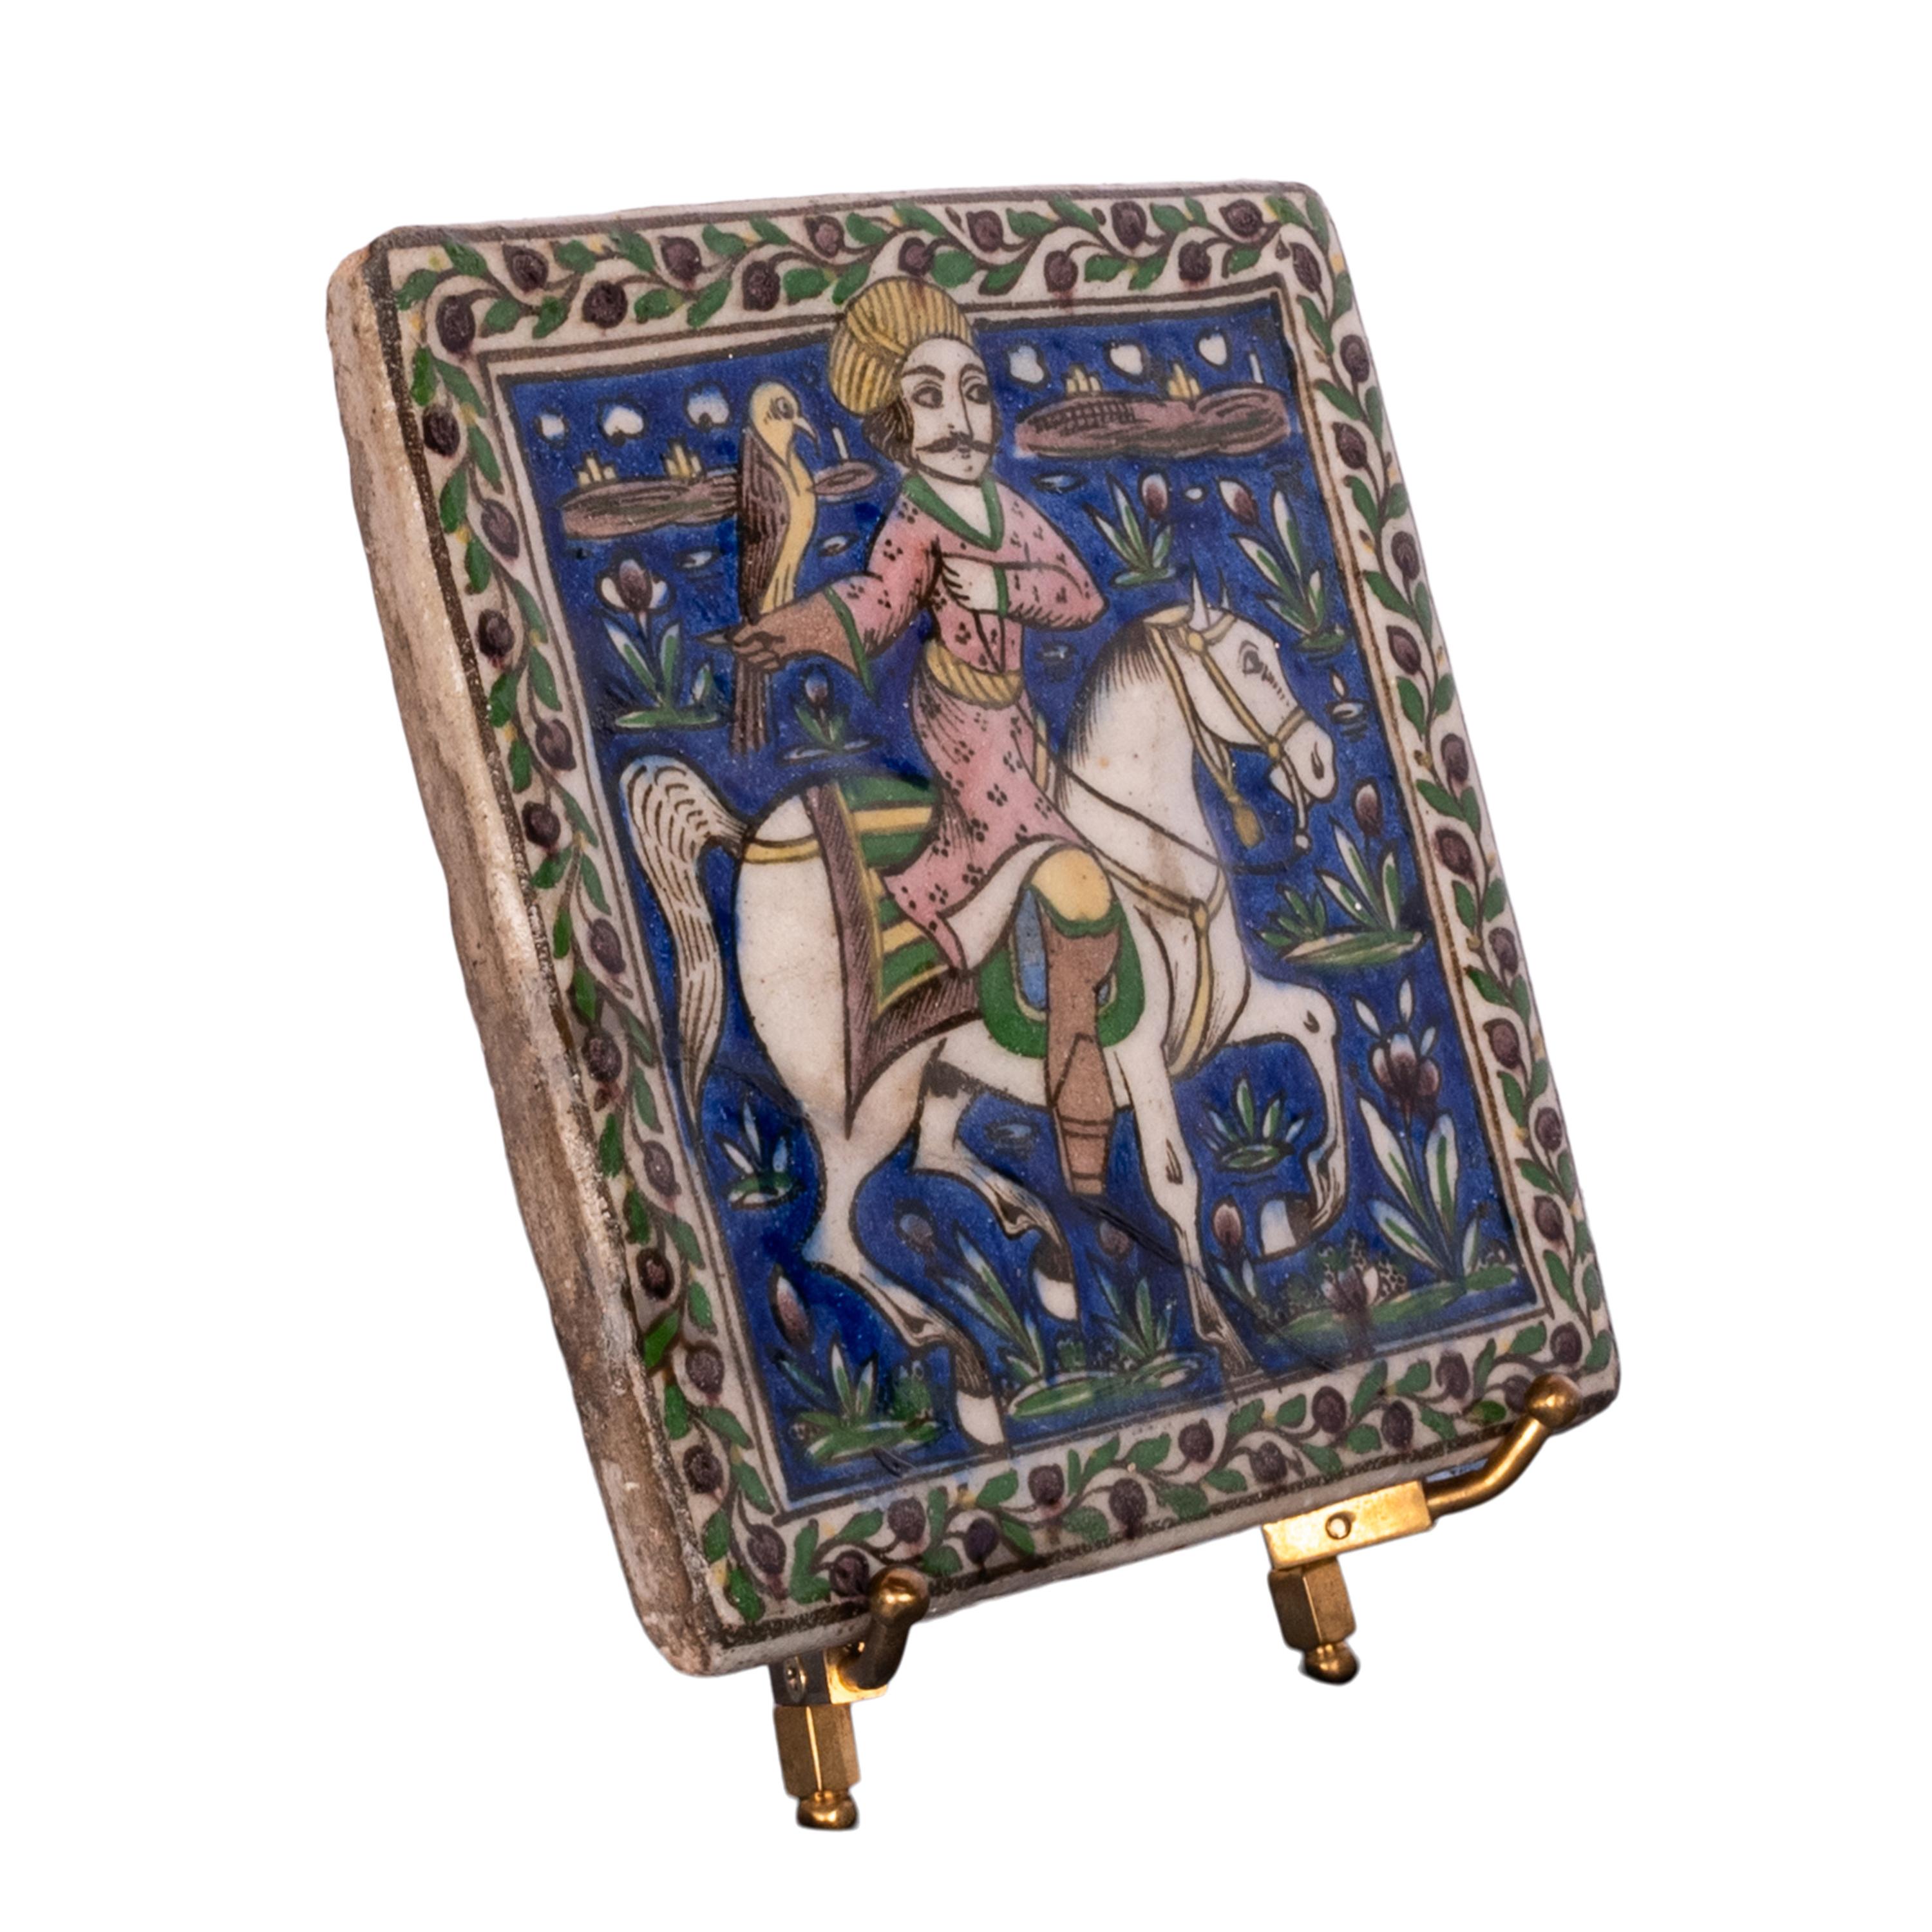 A good antique Persian Islamic Qajar period tile, circa 1850.
These tiles were mainly produced in Tehran, the Qajar capital, continuous friezes of rectangular underglaze-painted tiles, such as this example, were common in nineteenth-century